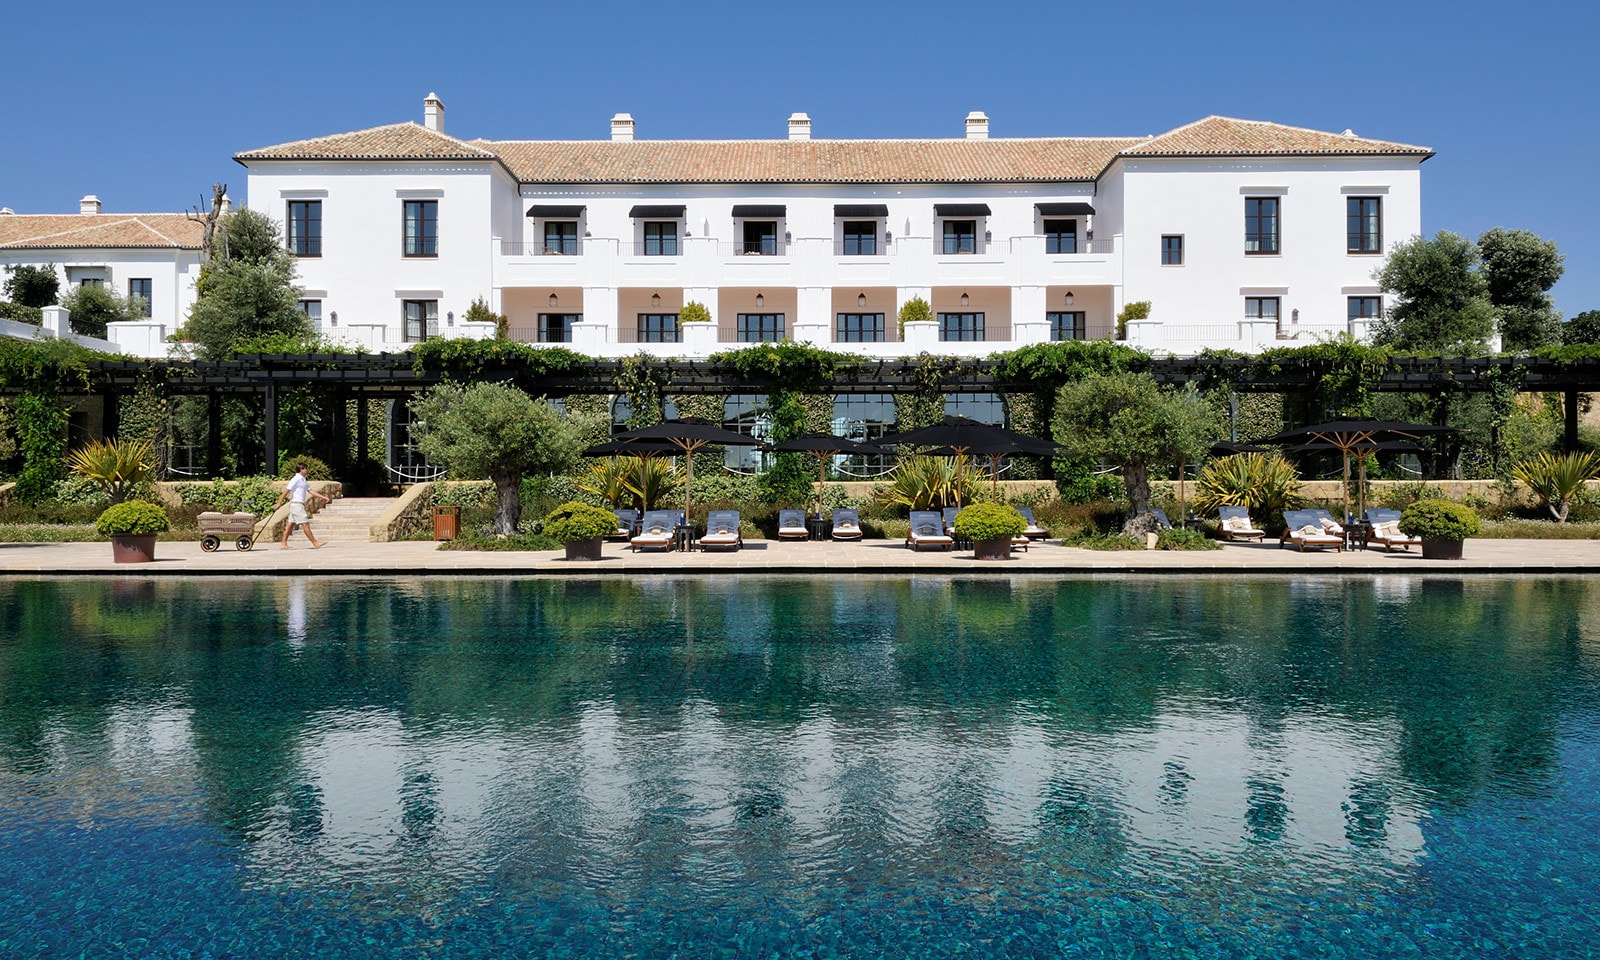 Finca Cortesin: An Exclusive and Luxurious Hotel for a Perfect Stay in Málaga